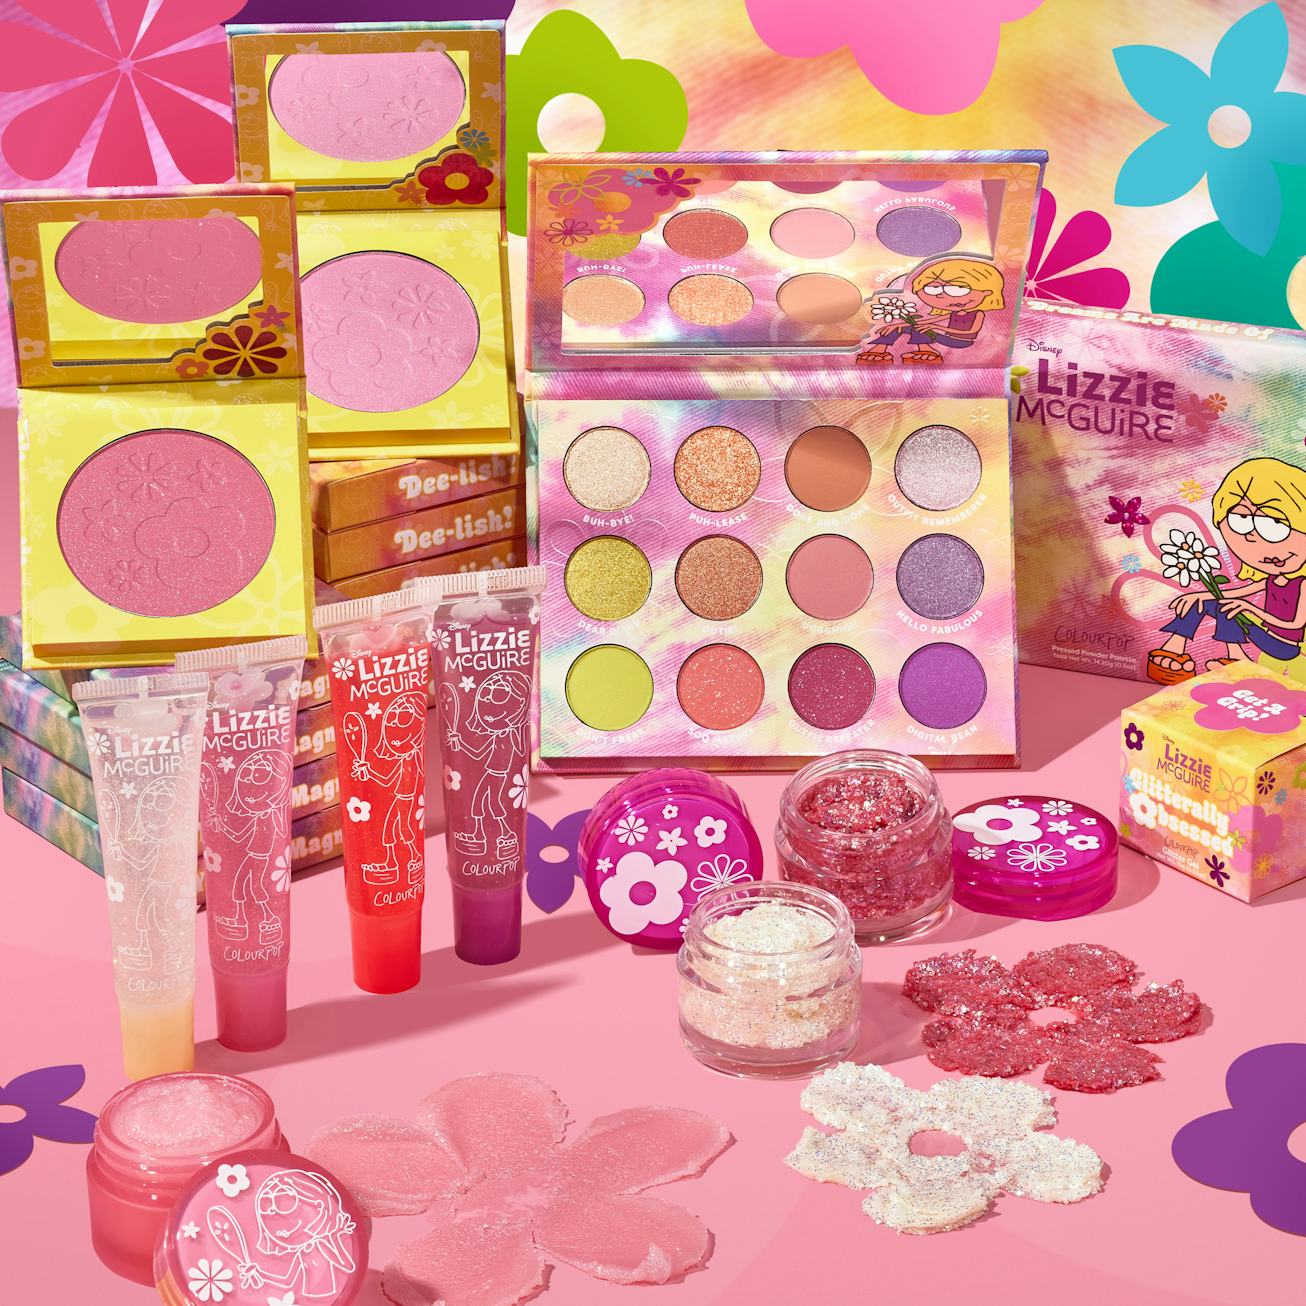 ColourPop x Disney Lizzie McGuire collaboration products including eyeshadow palette and blush